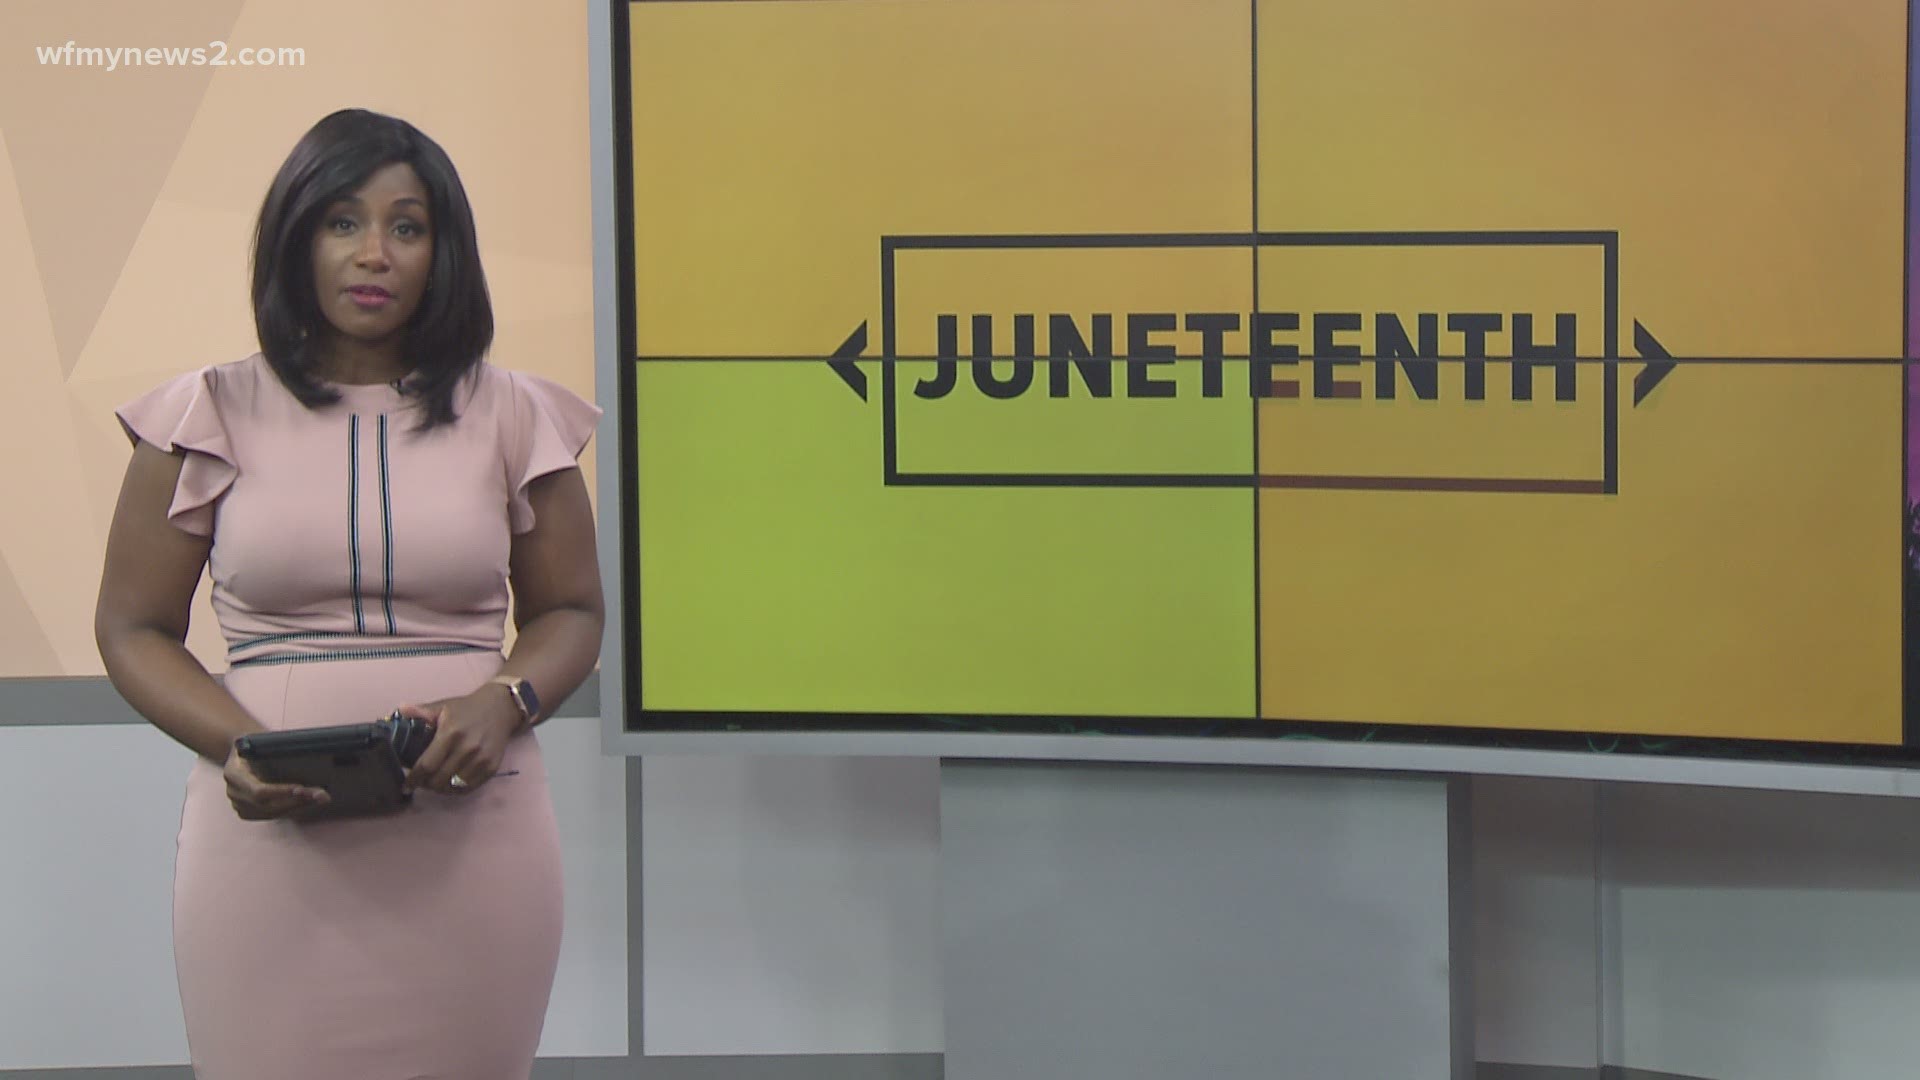 The Juneteenth holiday will serve as an opportunity to celebrate Black culture, discuss solutions to racial injustices and bring people together.